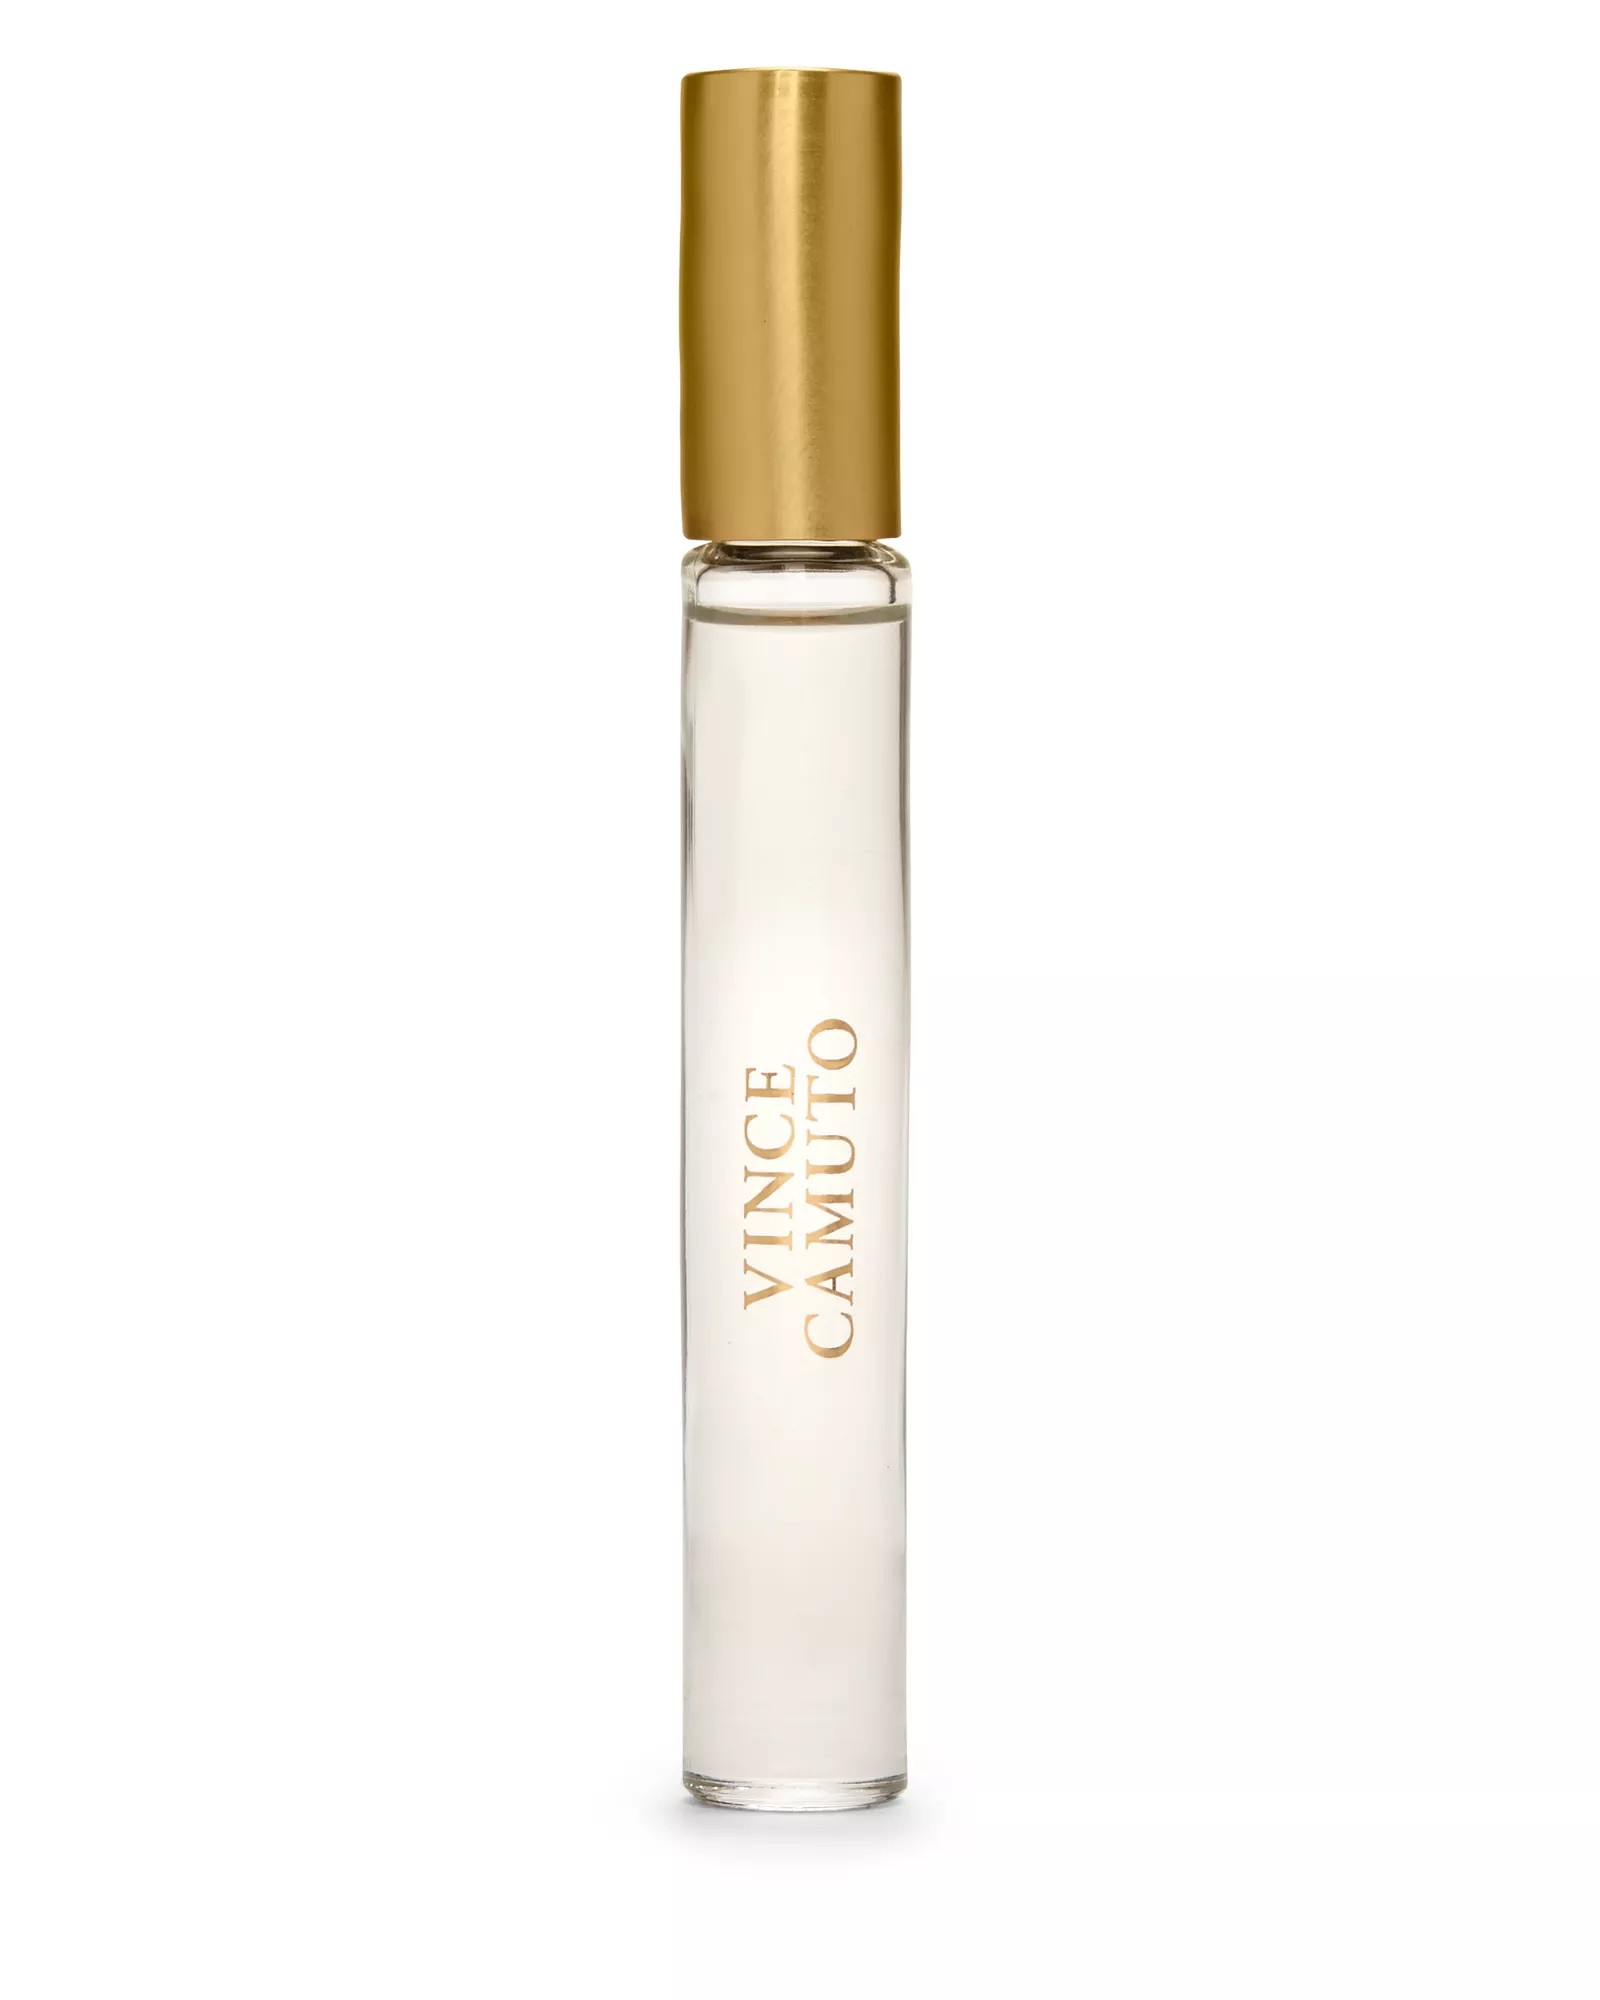 Vince Camuto Amore Vince Camuto Rollerball